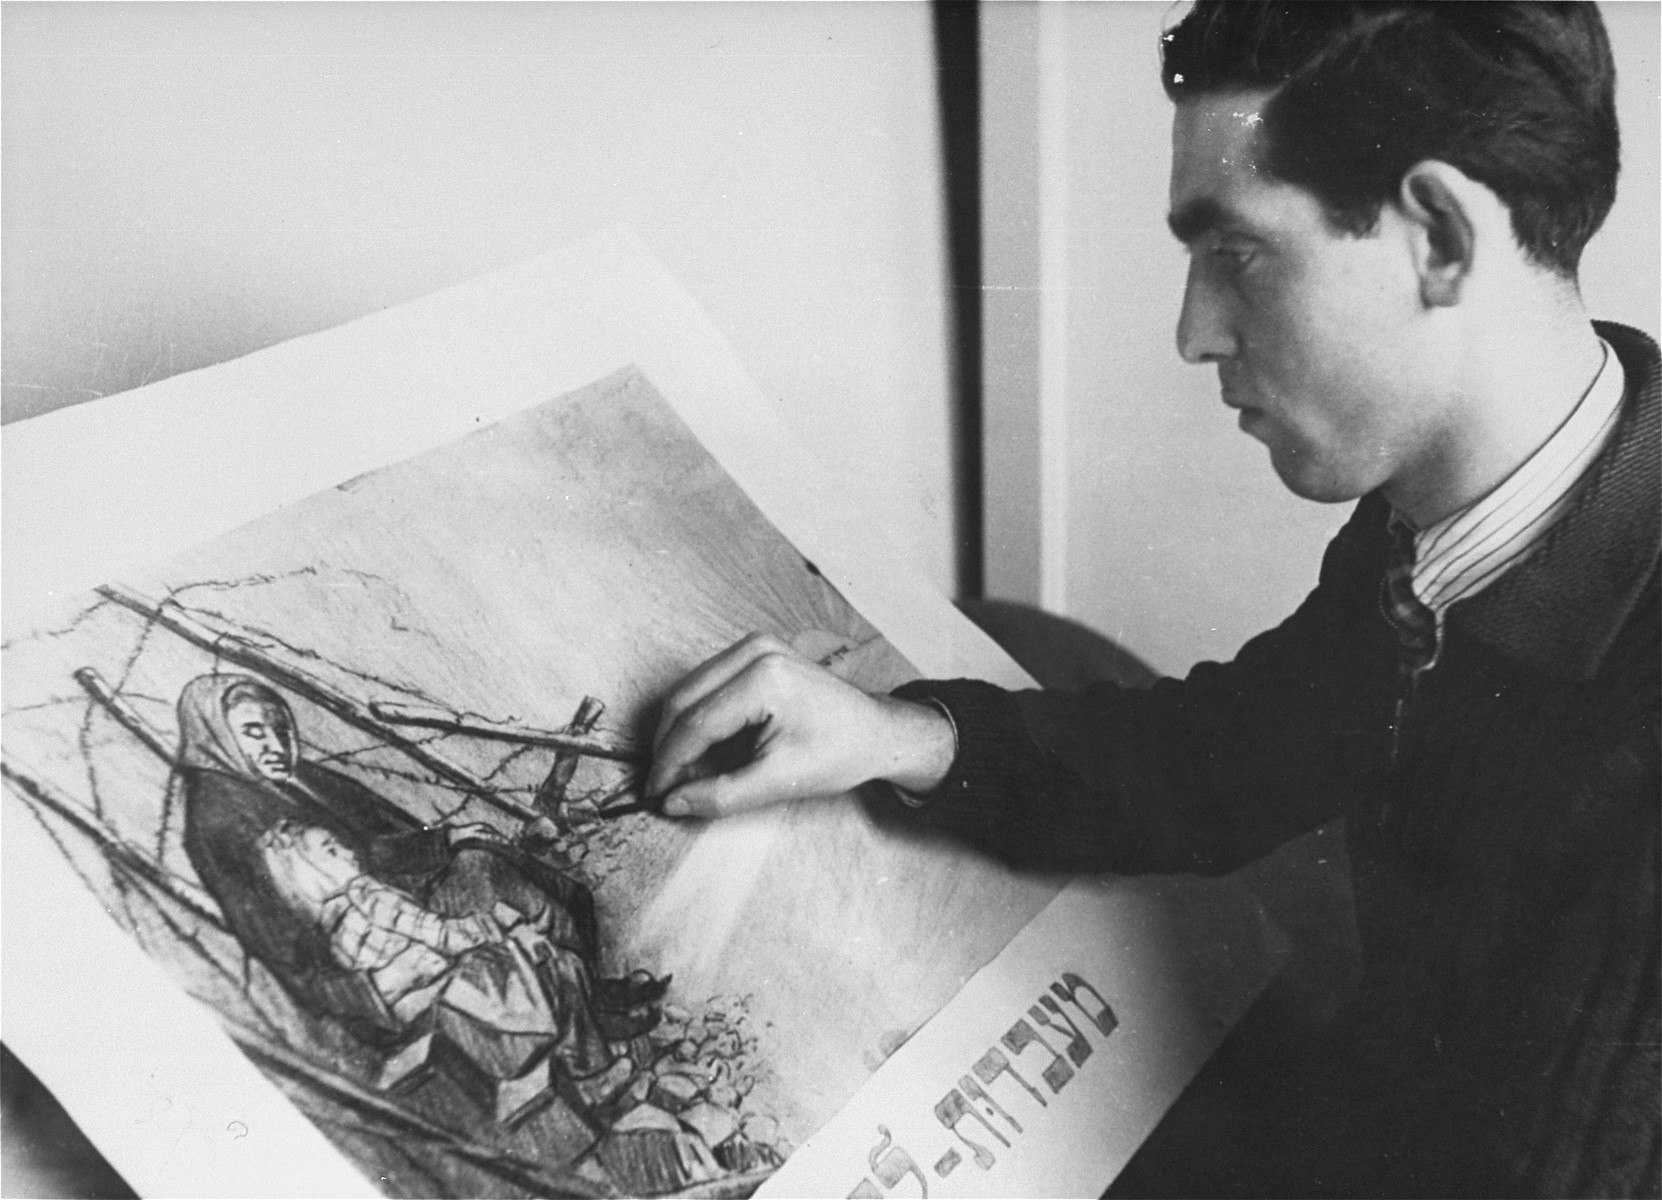 Metzger, a young artist in the Landsberg displaced persons' camp, works on a charcoal drawing entitled "From Slavery to Freedom."

The inscription written on the back of the photograph by George Kadish reads (translated from Yiddish), "A young artist in the camp."